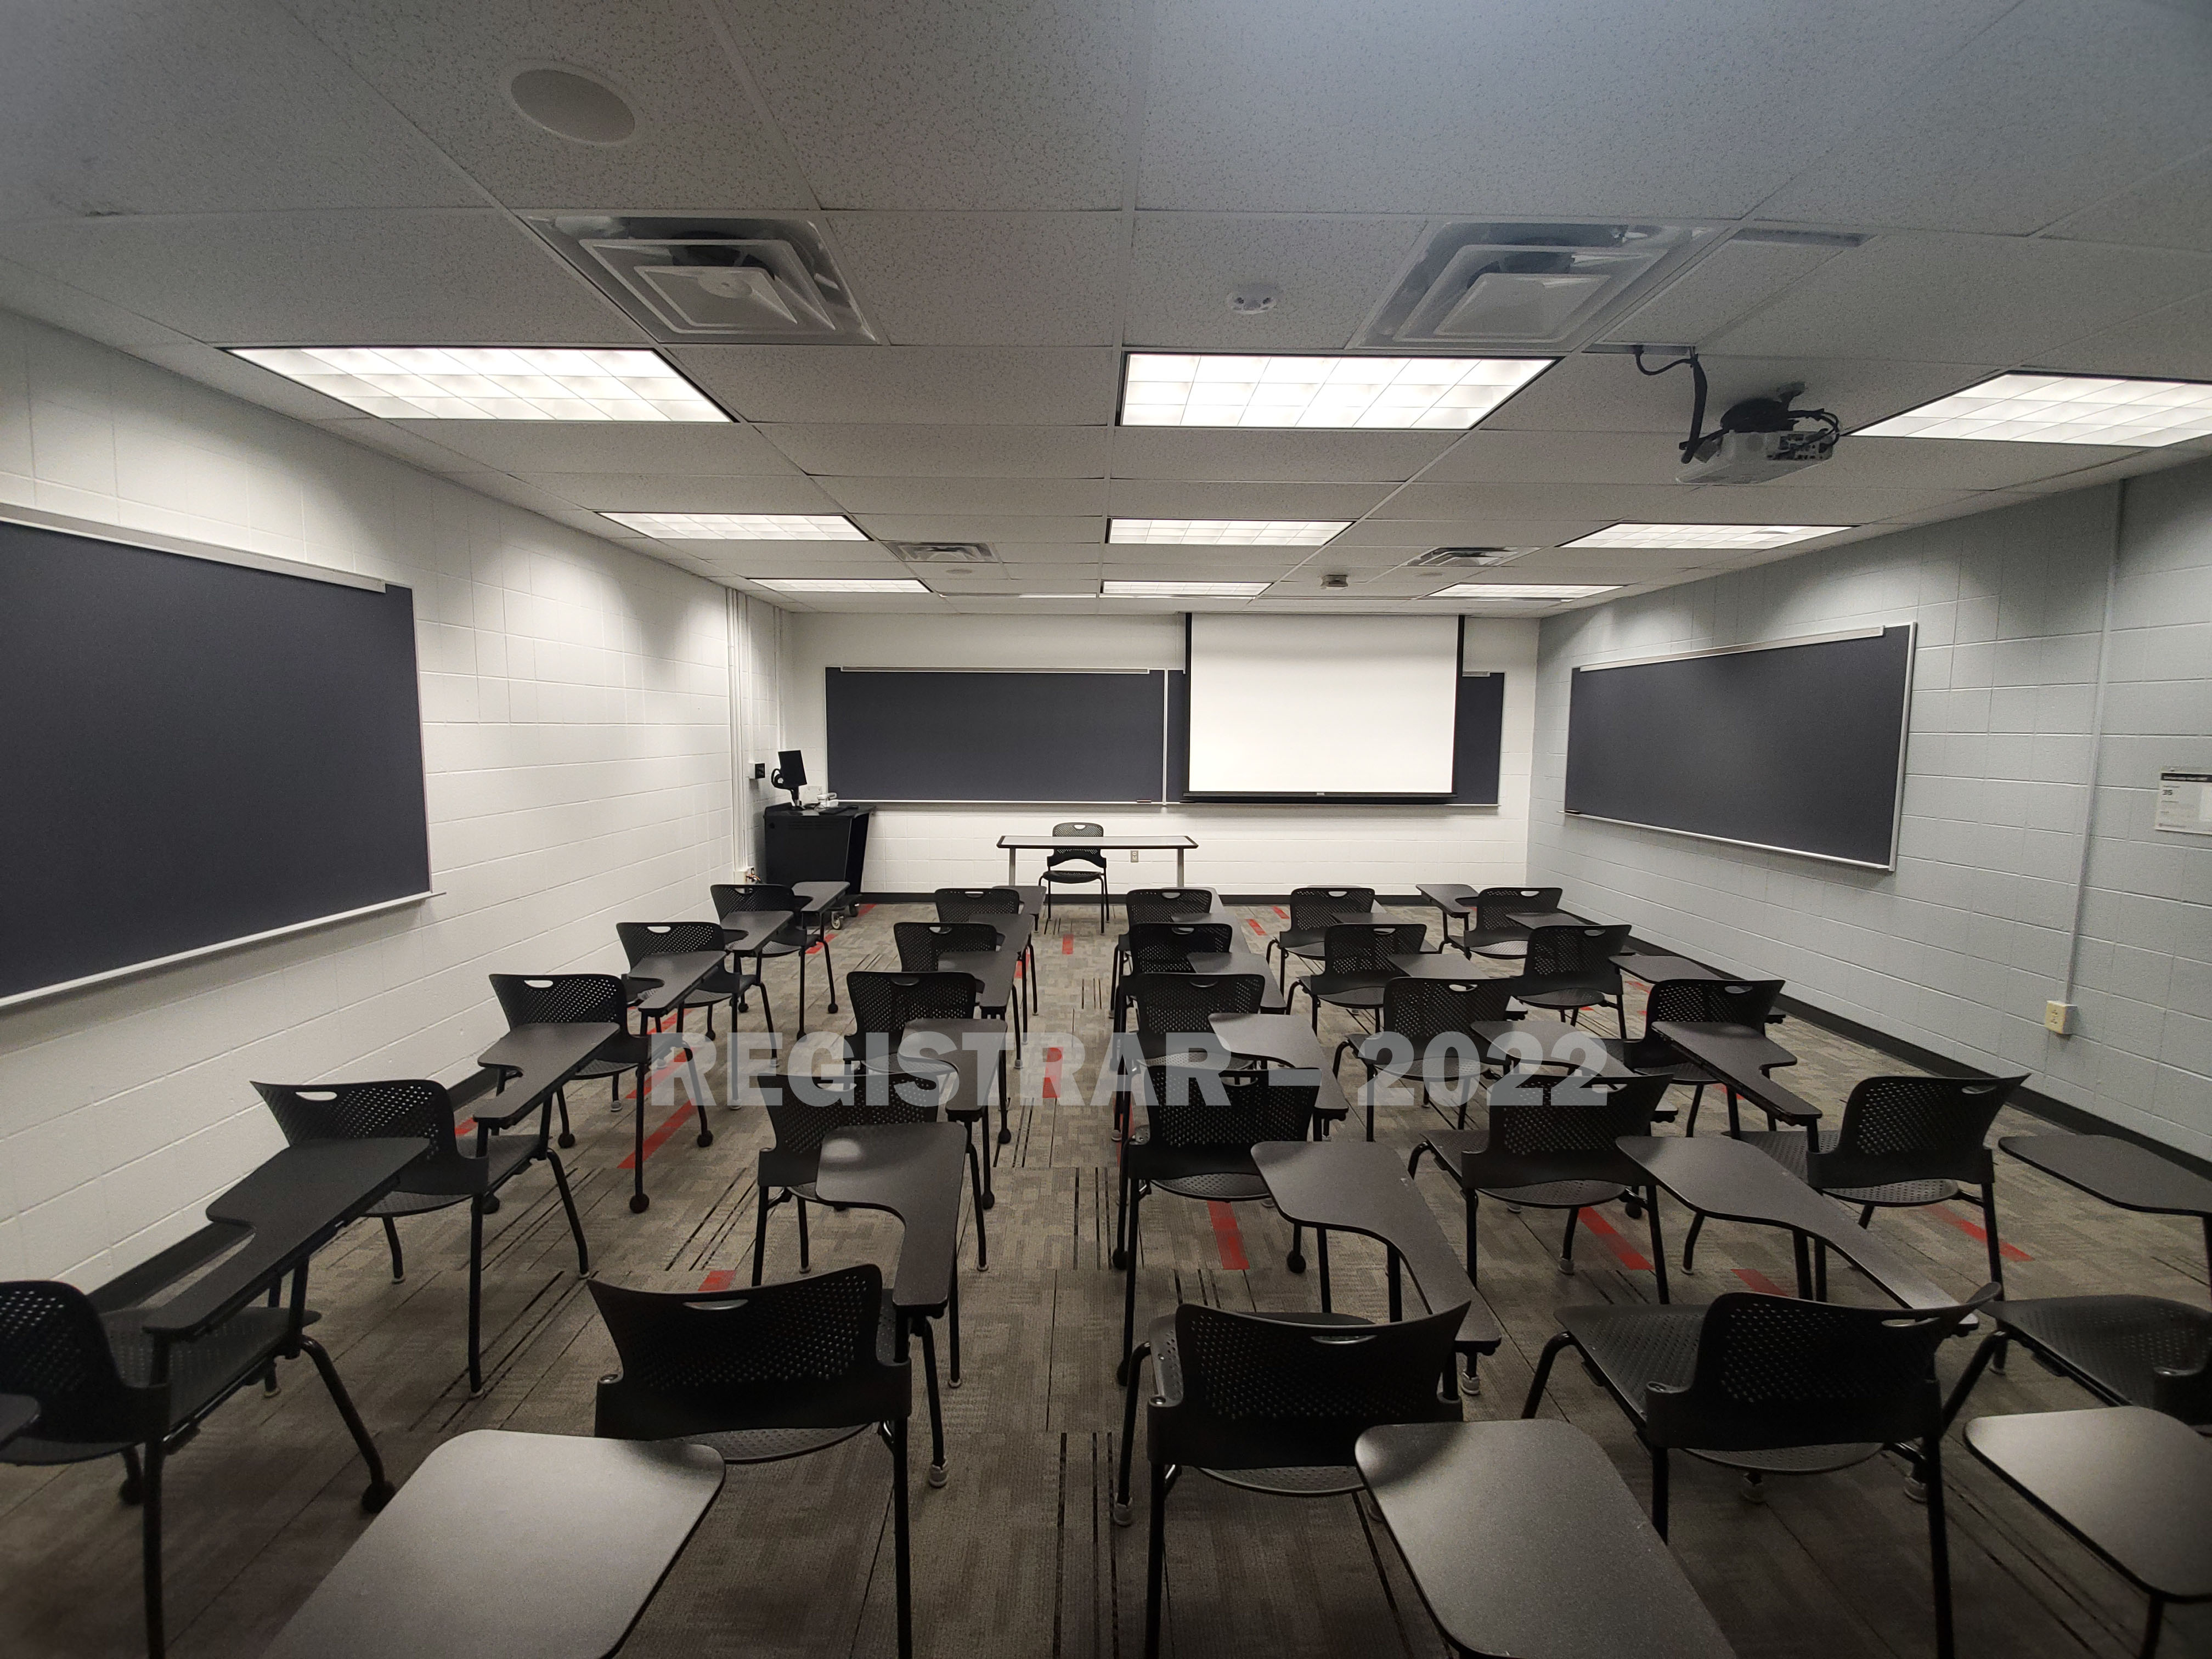 University Hall room 47 back of room projection screen down ultra wide angle view